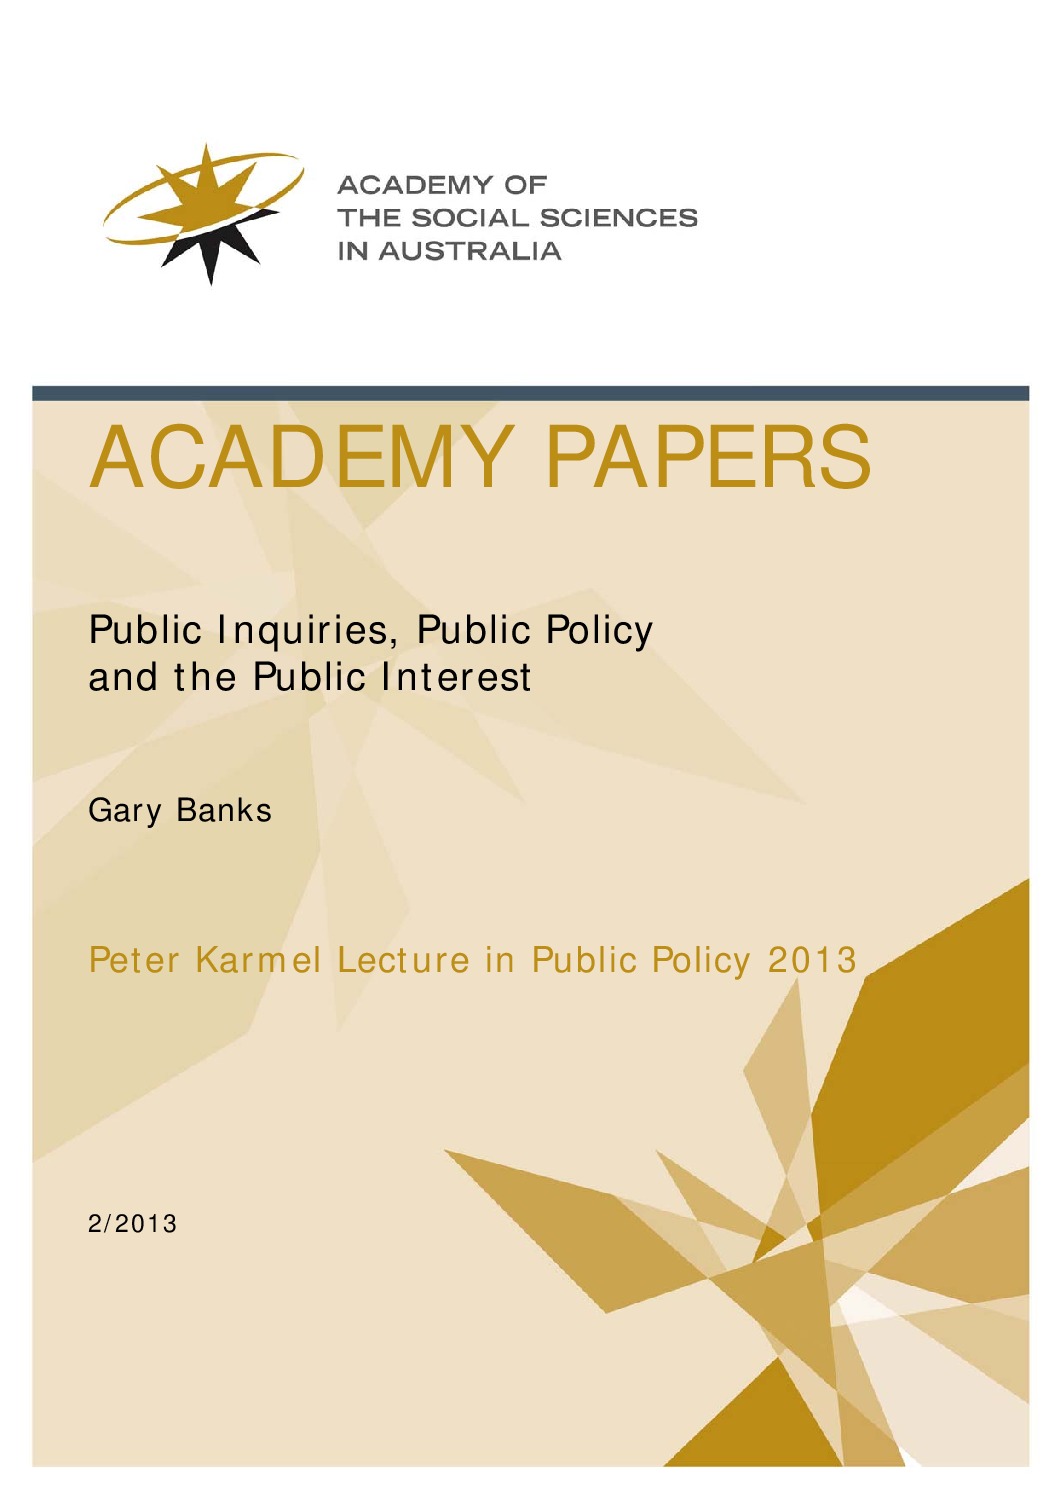 Academy Papers 2/2013: Public Inquiries, Public Policy and the Public Interest